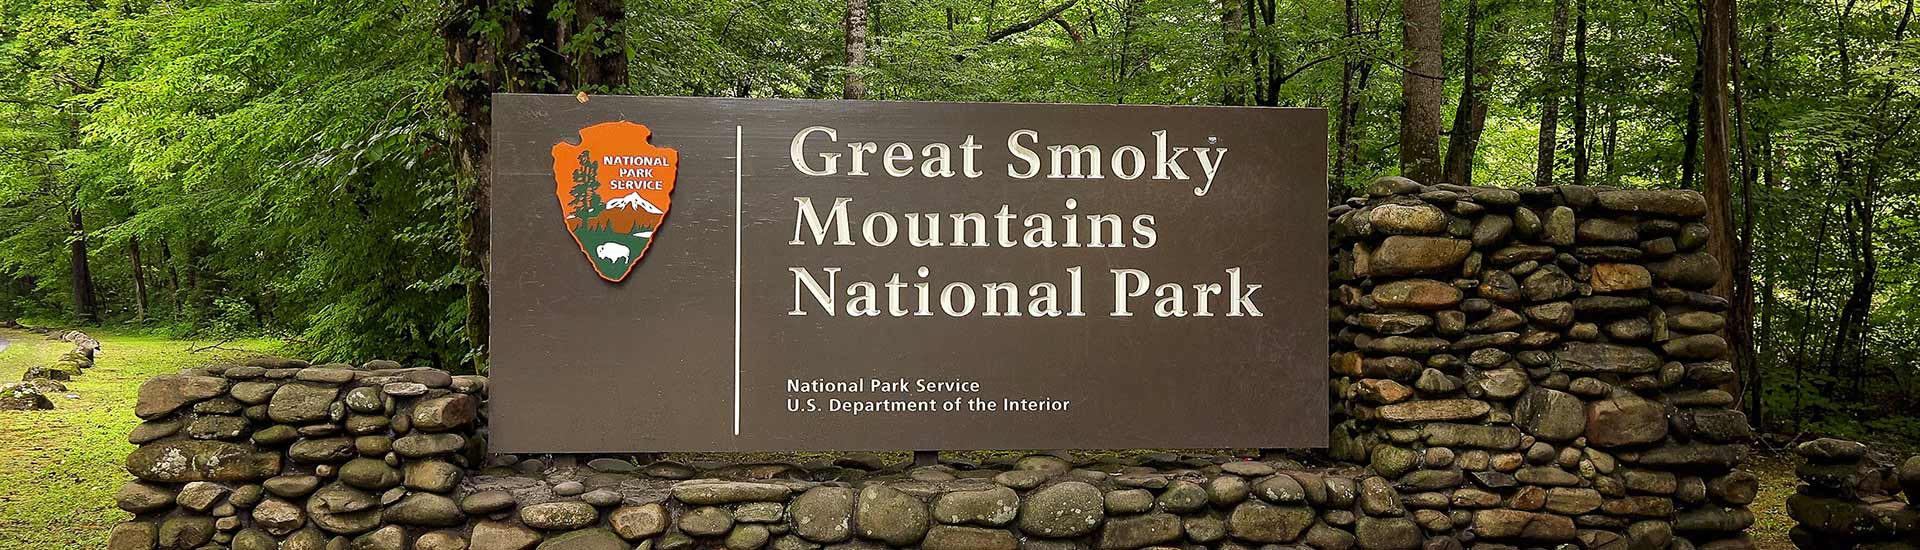 Great Smoky Mountains National Park sign at the Gatlinburg entrance to the Great Smoky Mountains, TN.